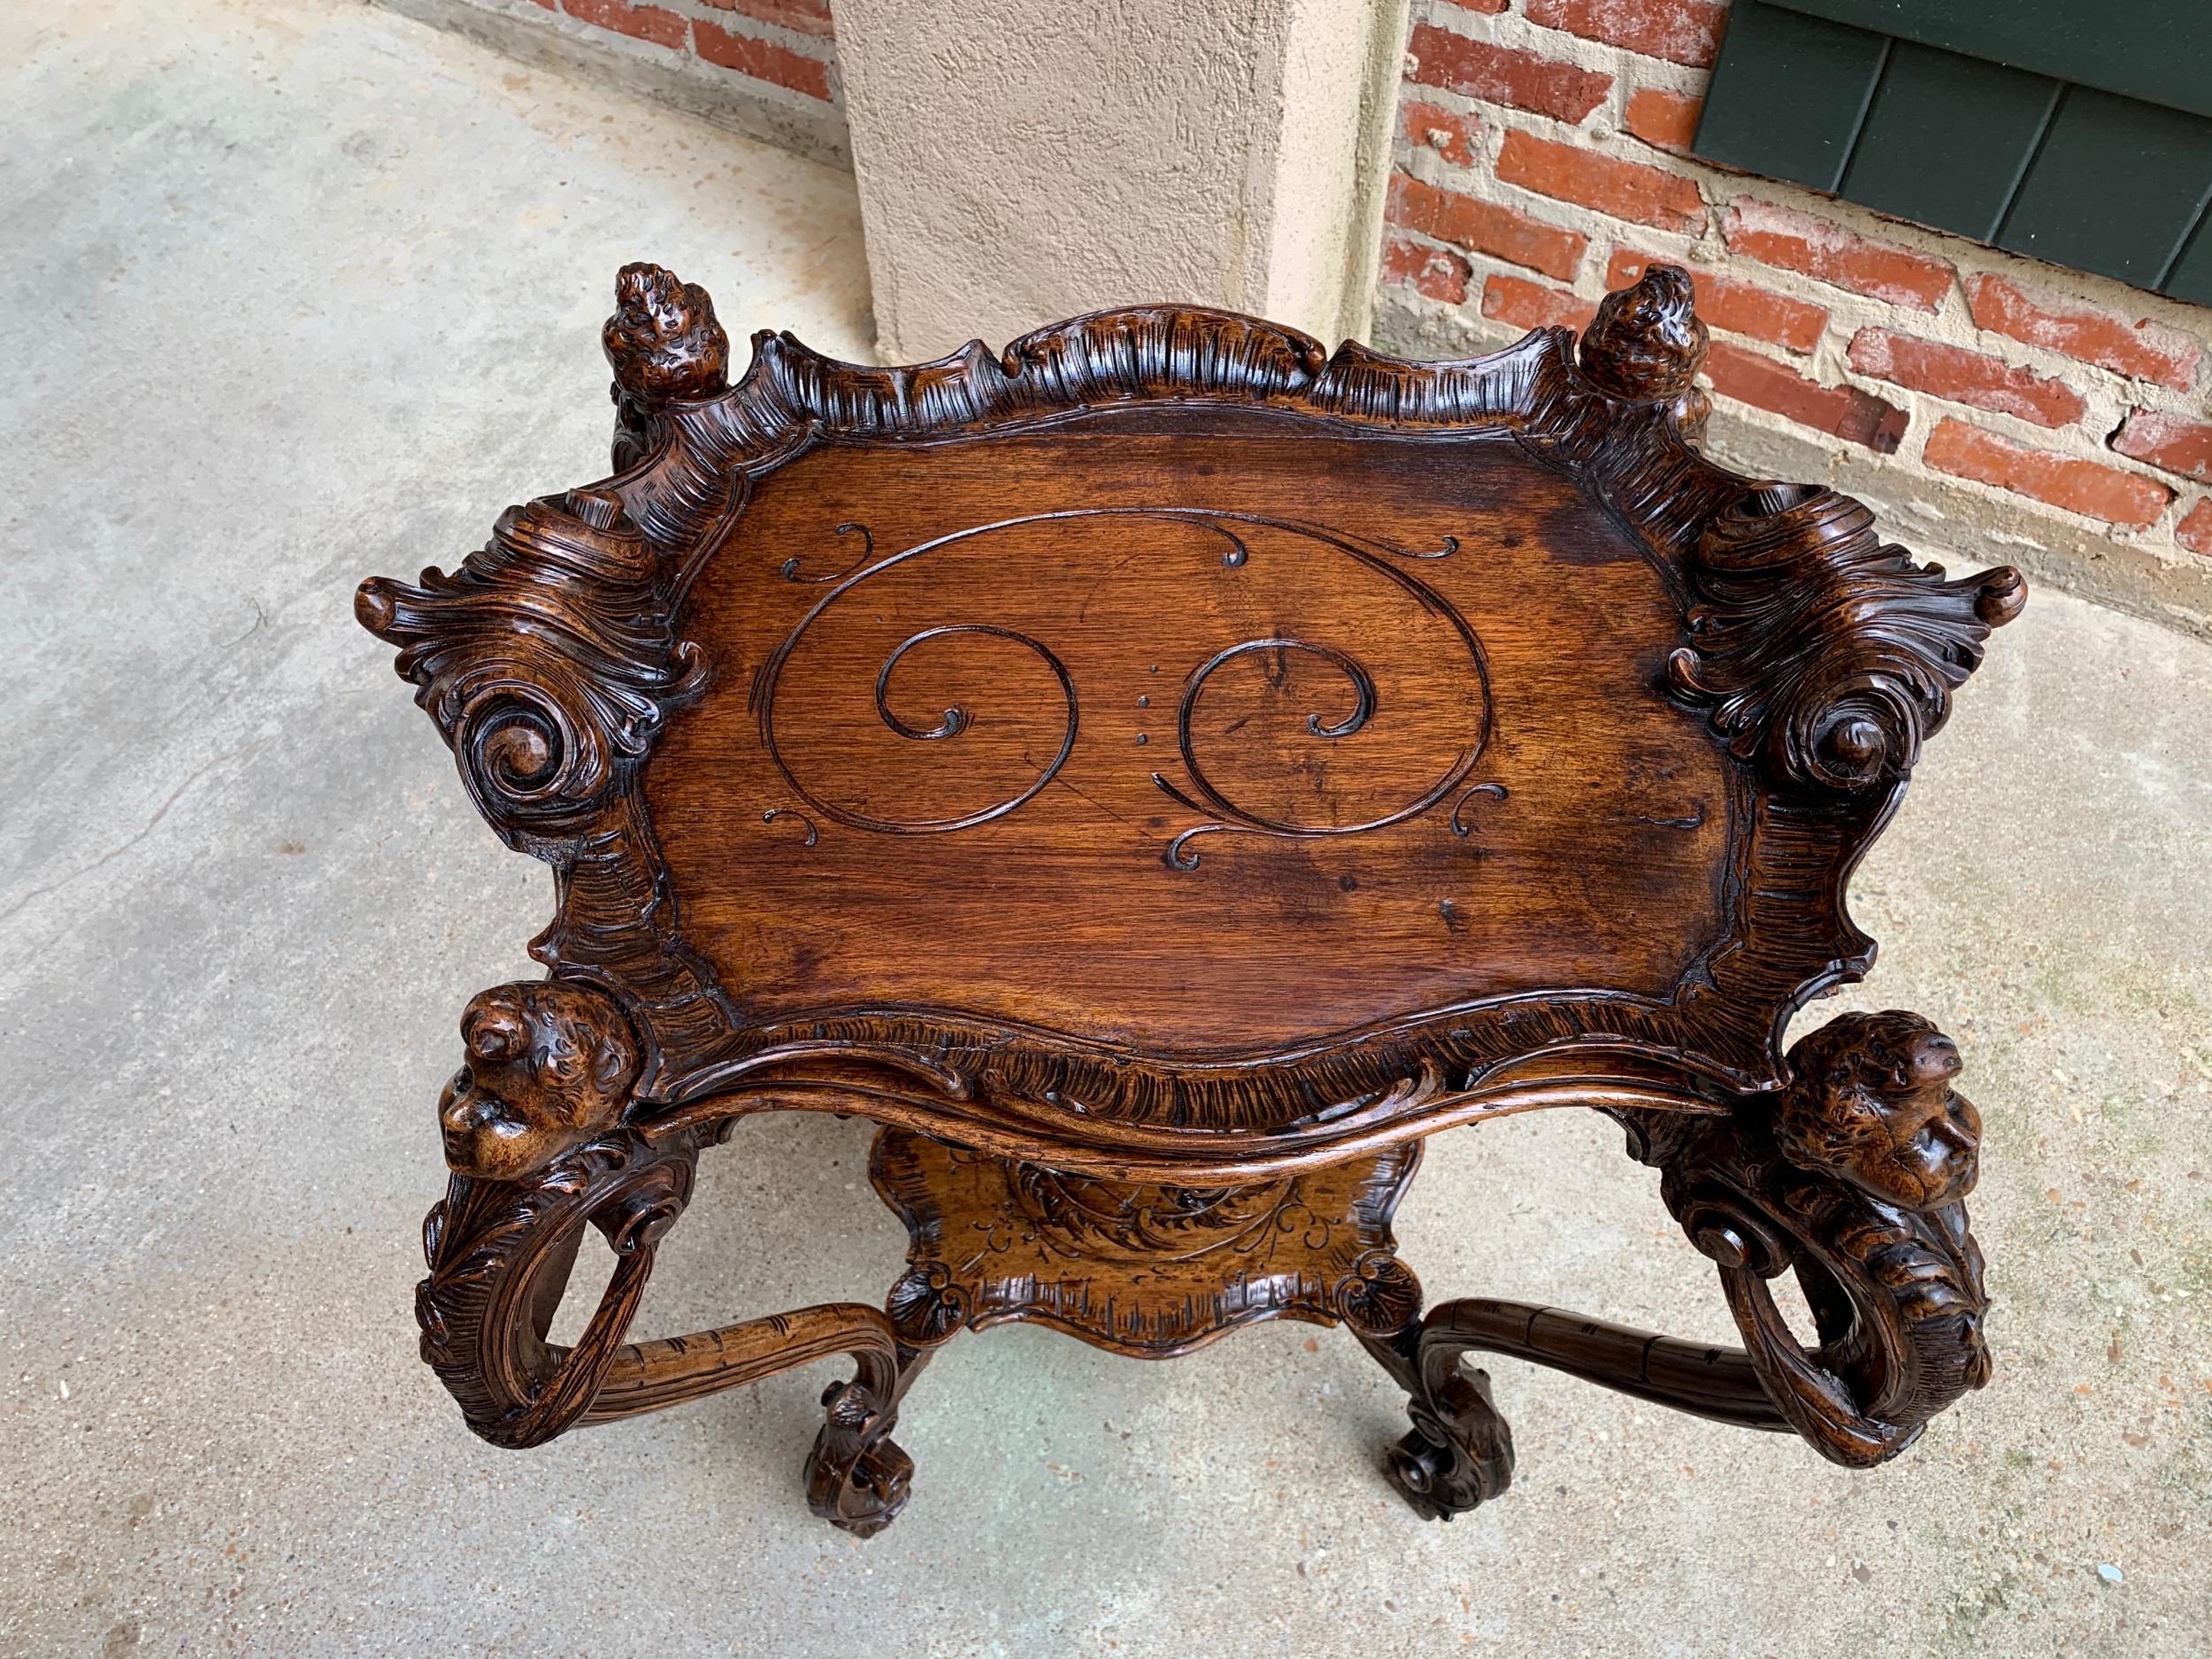 19th century French carved oak sofa dessert table serving tray Louis XV Cherub

~Direct from France~
~Gorgeous 19th century French dessert table with it’s original serving tray!~
~Opulent hand carvings include dimensional cherubs to the corners with